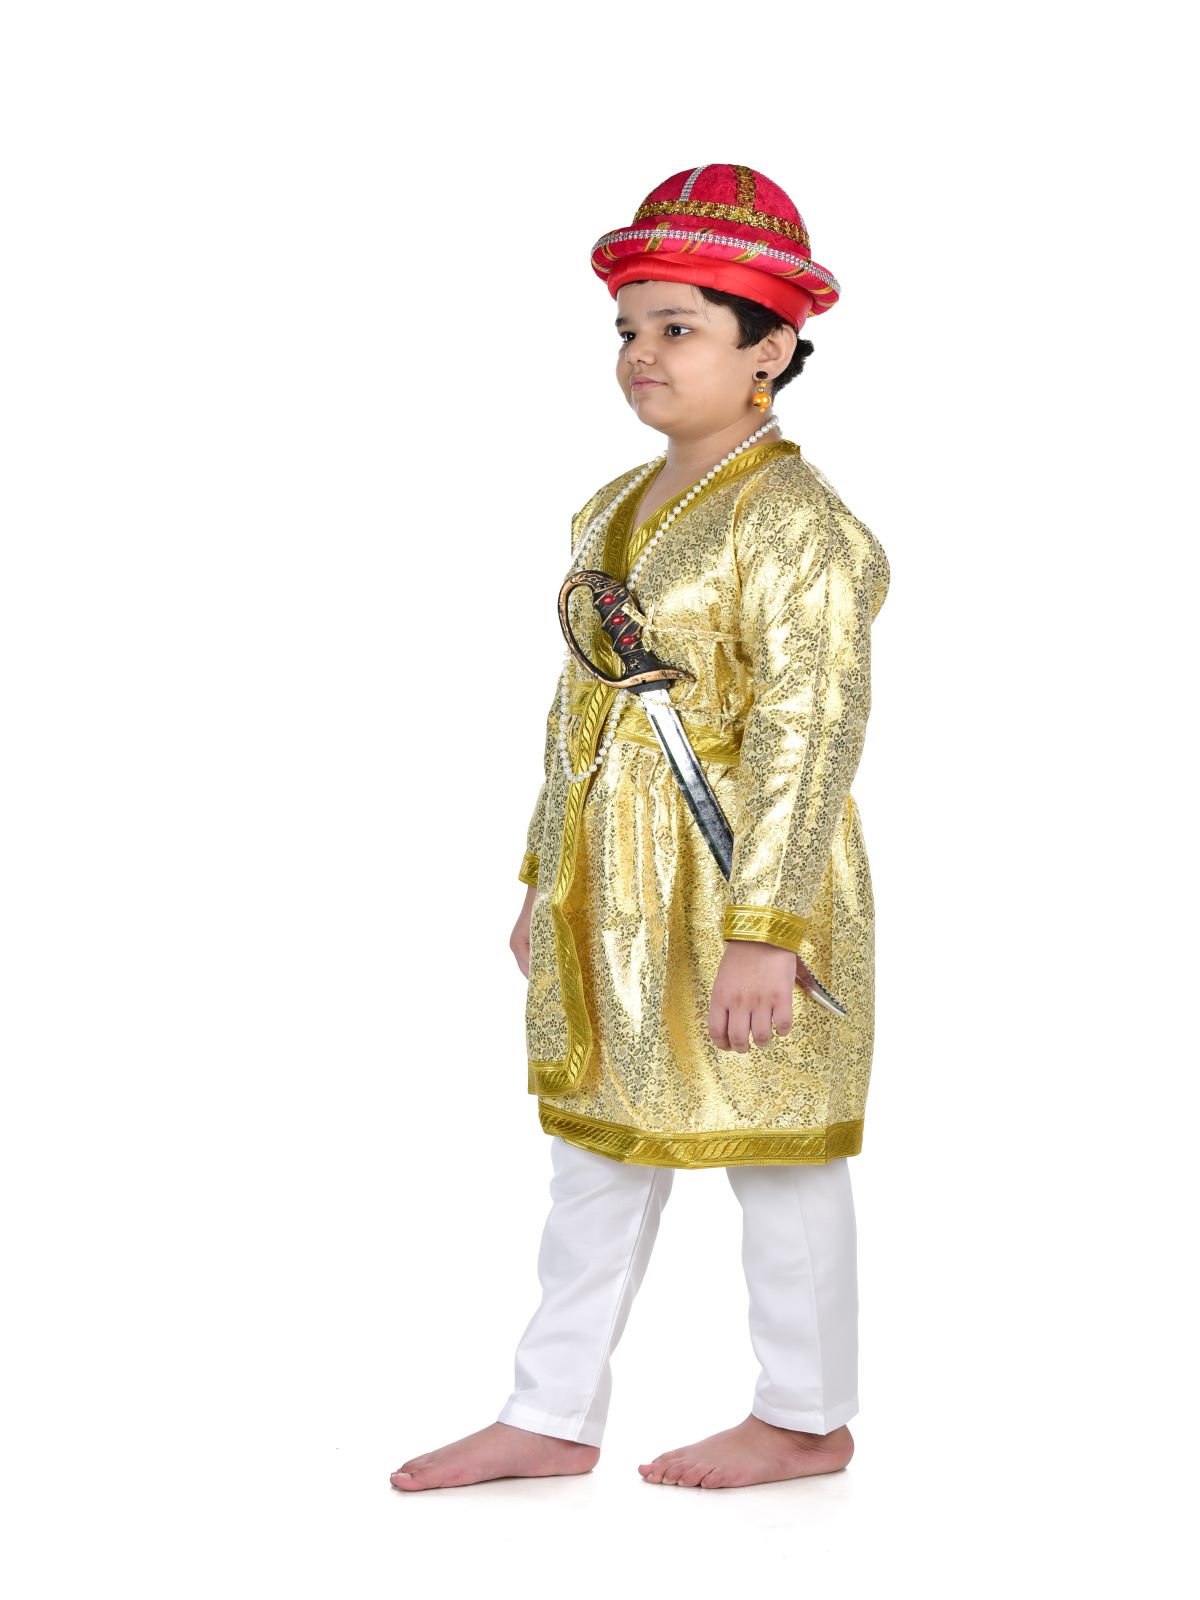 Buy Kaku Fancy Dresses The Great Mughal King Akbar Costume/Indian  Historical Character Costume -Blue, 5-6 Years, For Boys Online at Low  Prices in India - Amazon.in